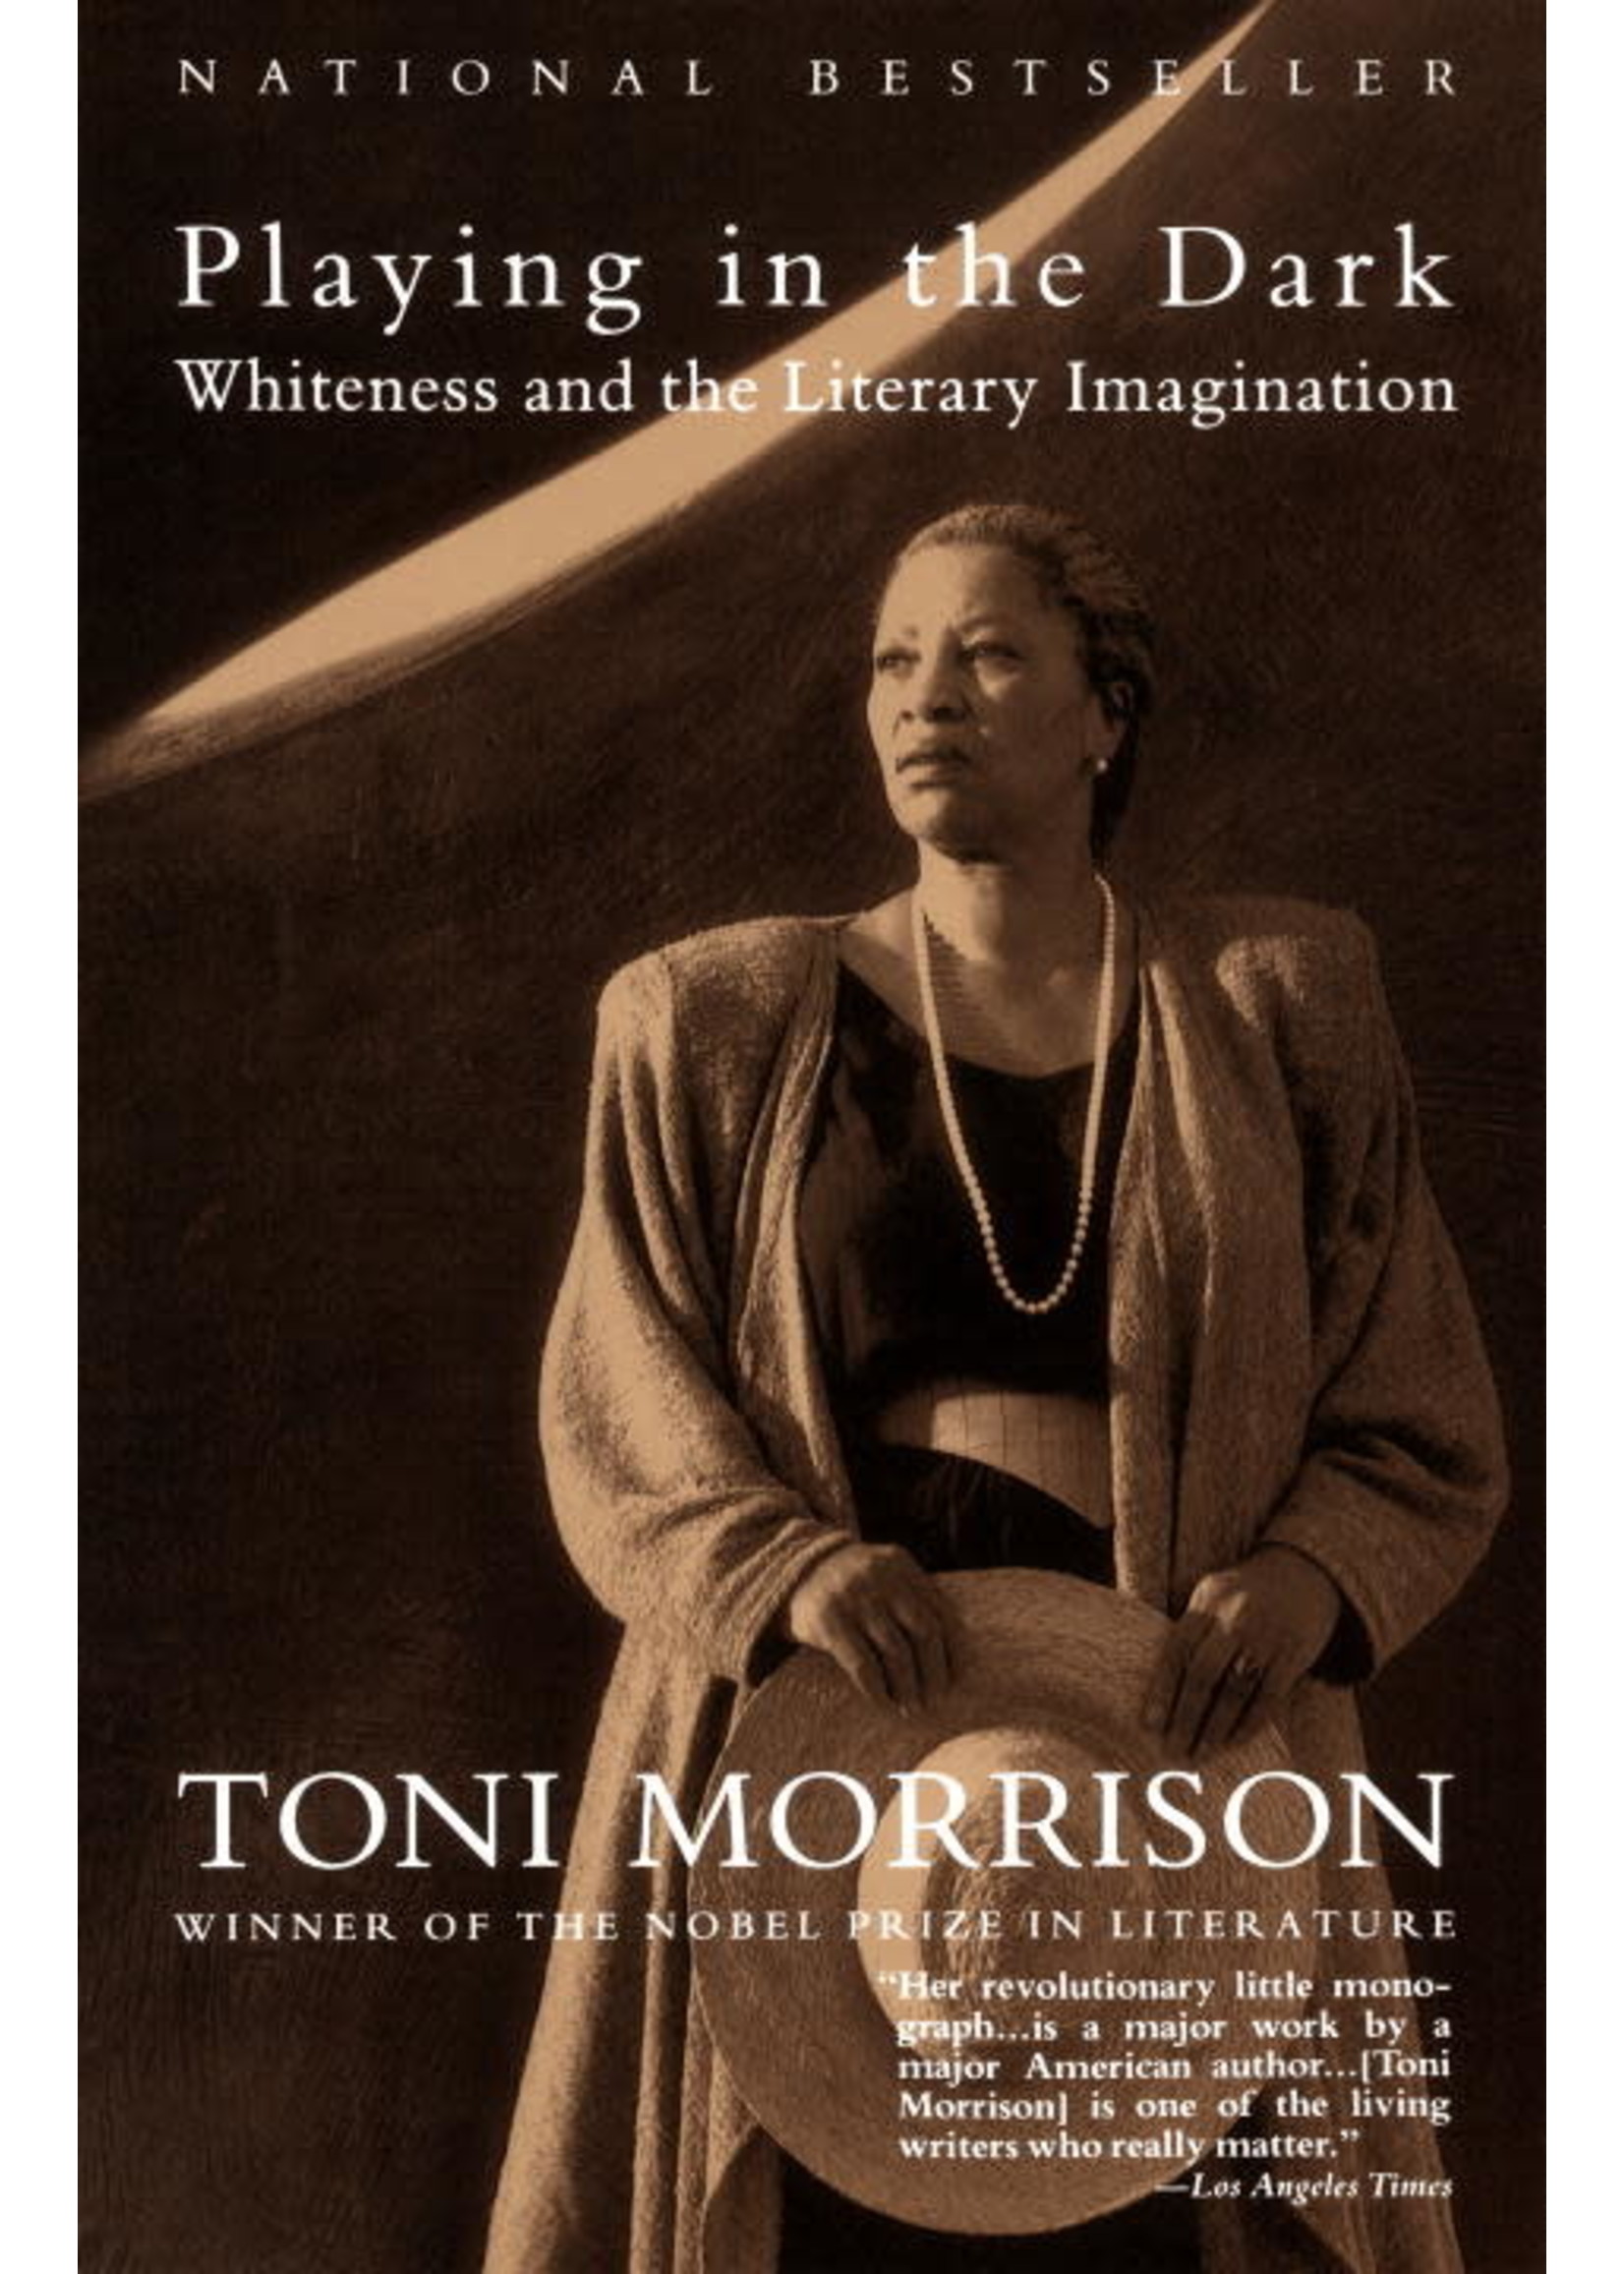 Playing In The Dark: Whiteness and the Literary Imagination by Toni Morrison